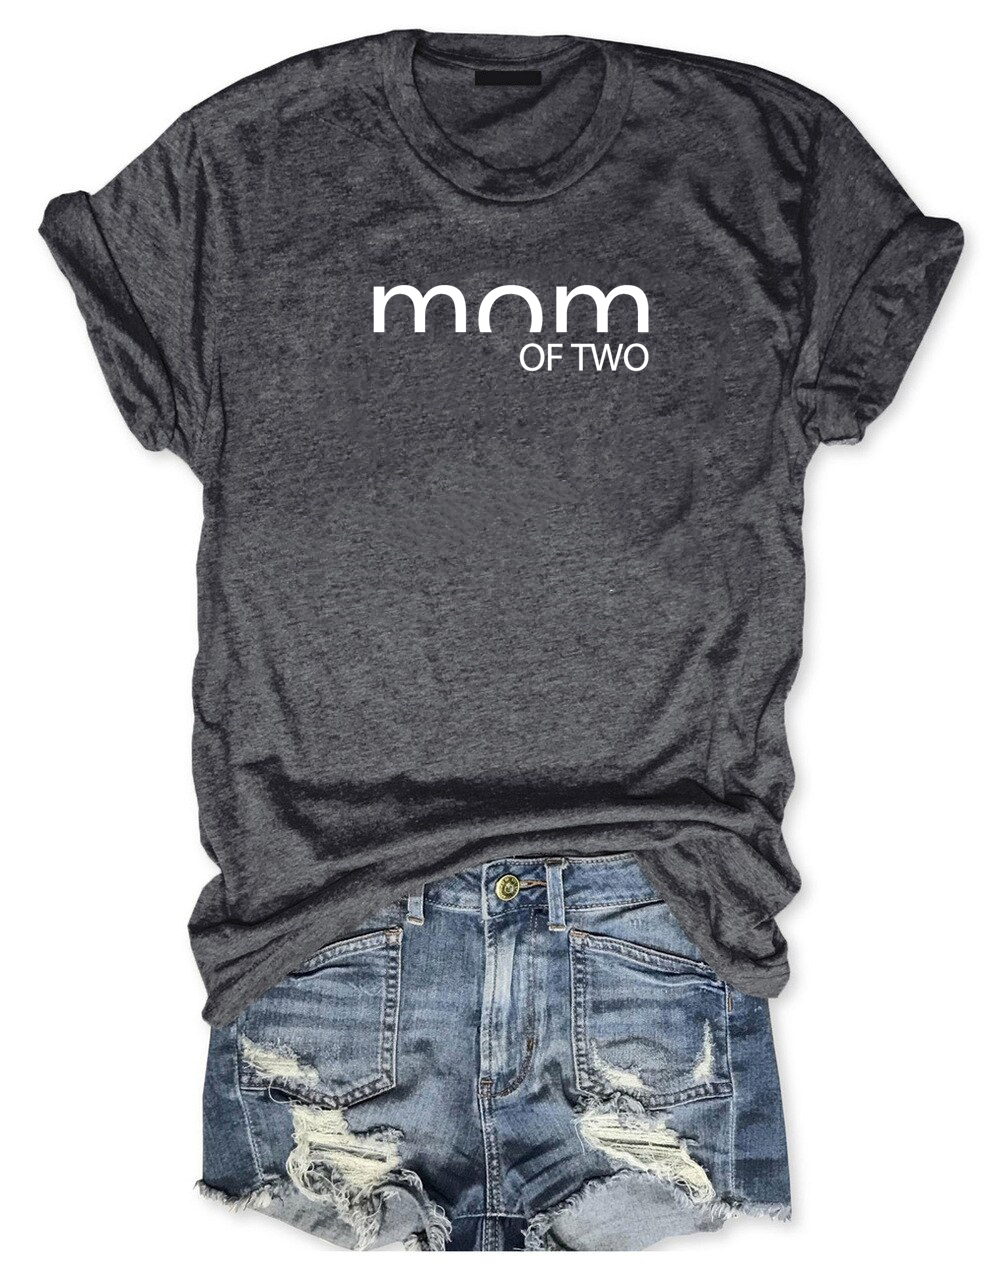 Mom Of Two T-shirt